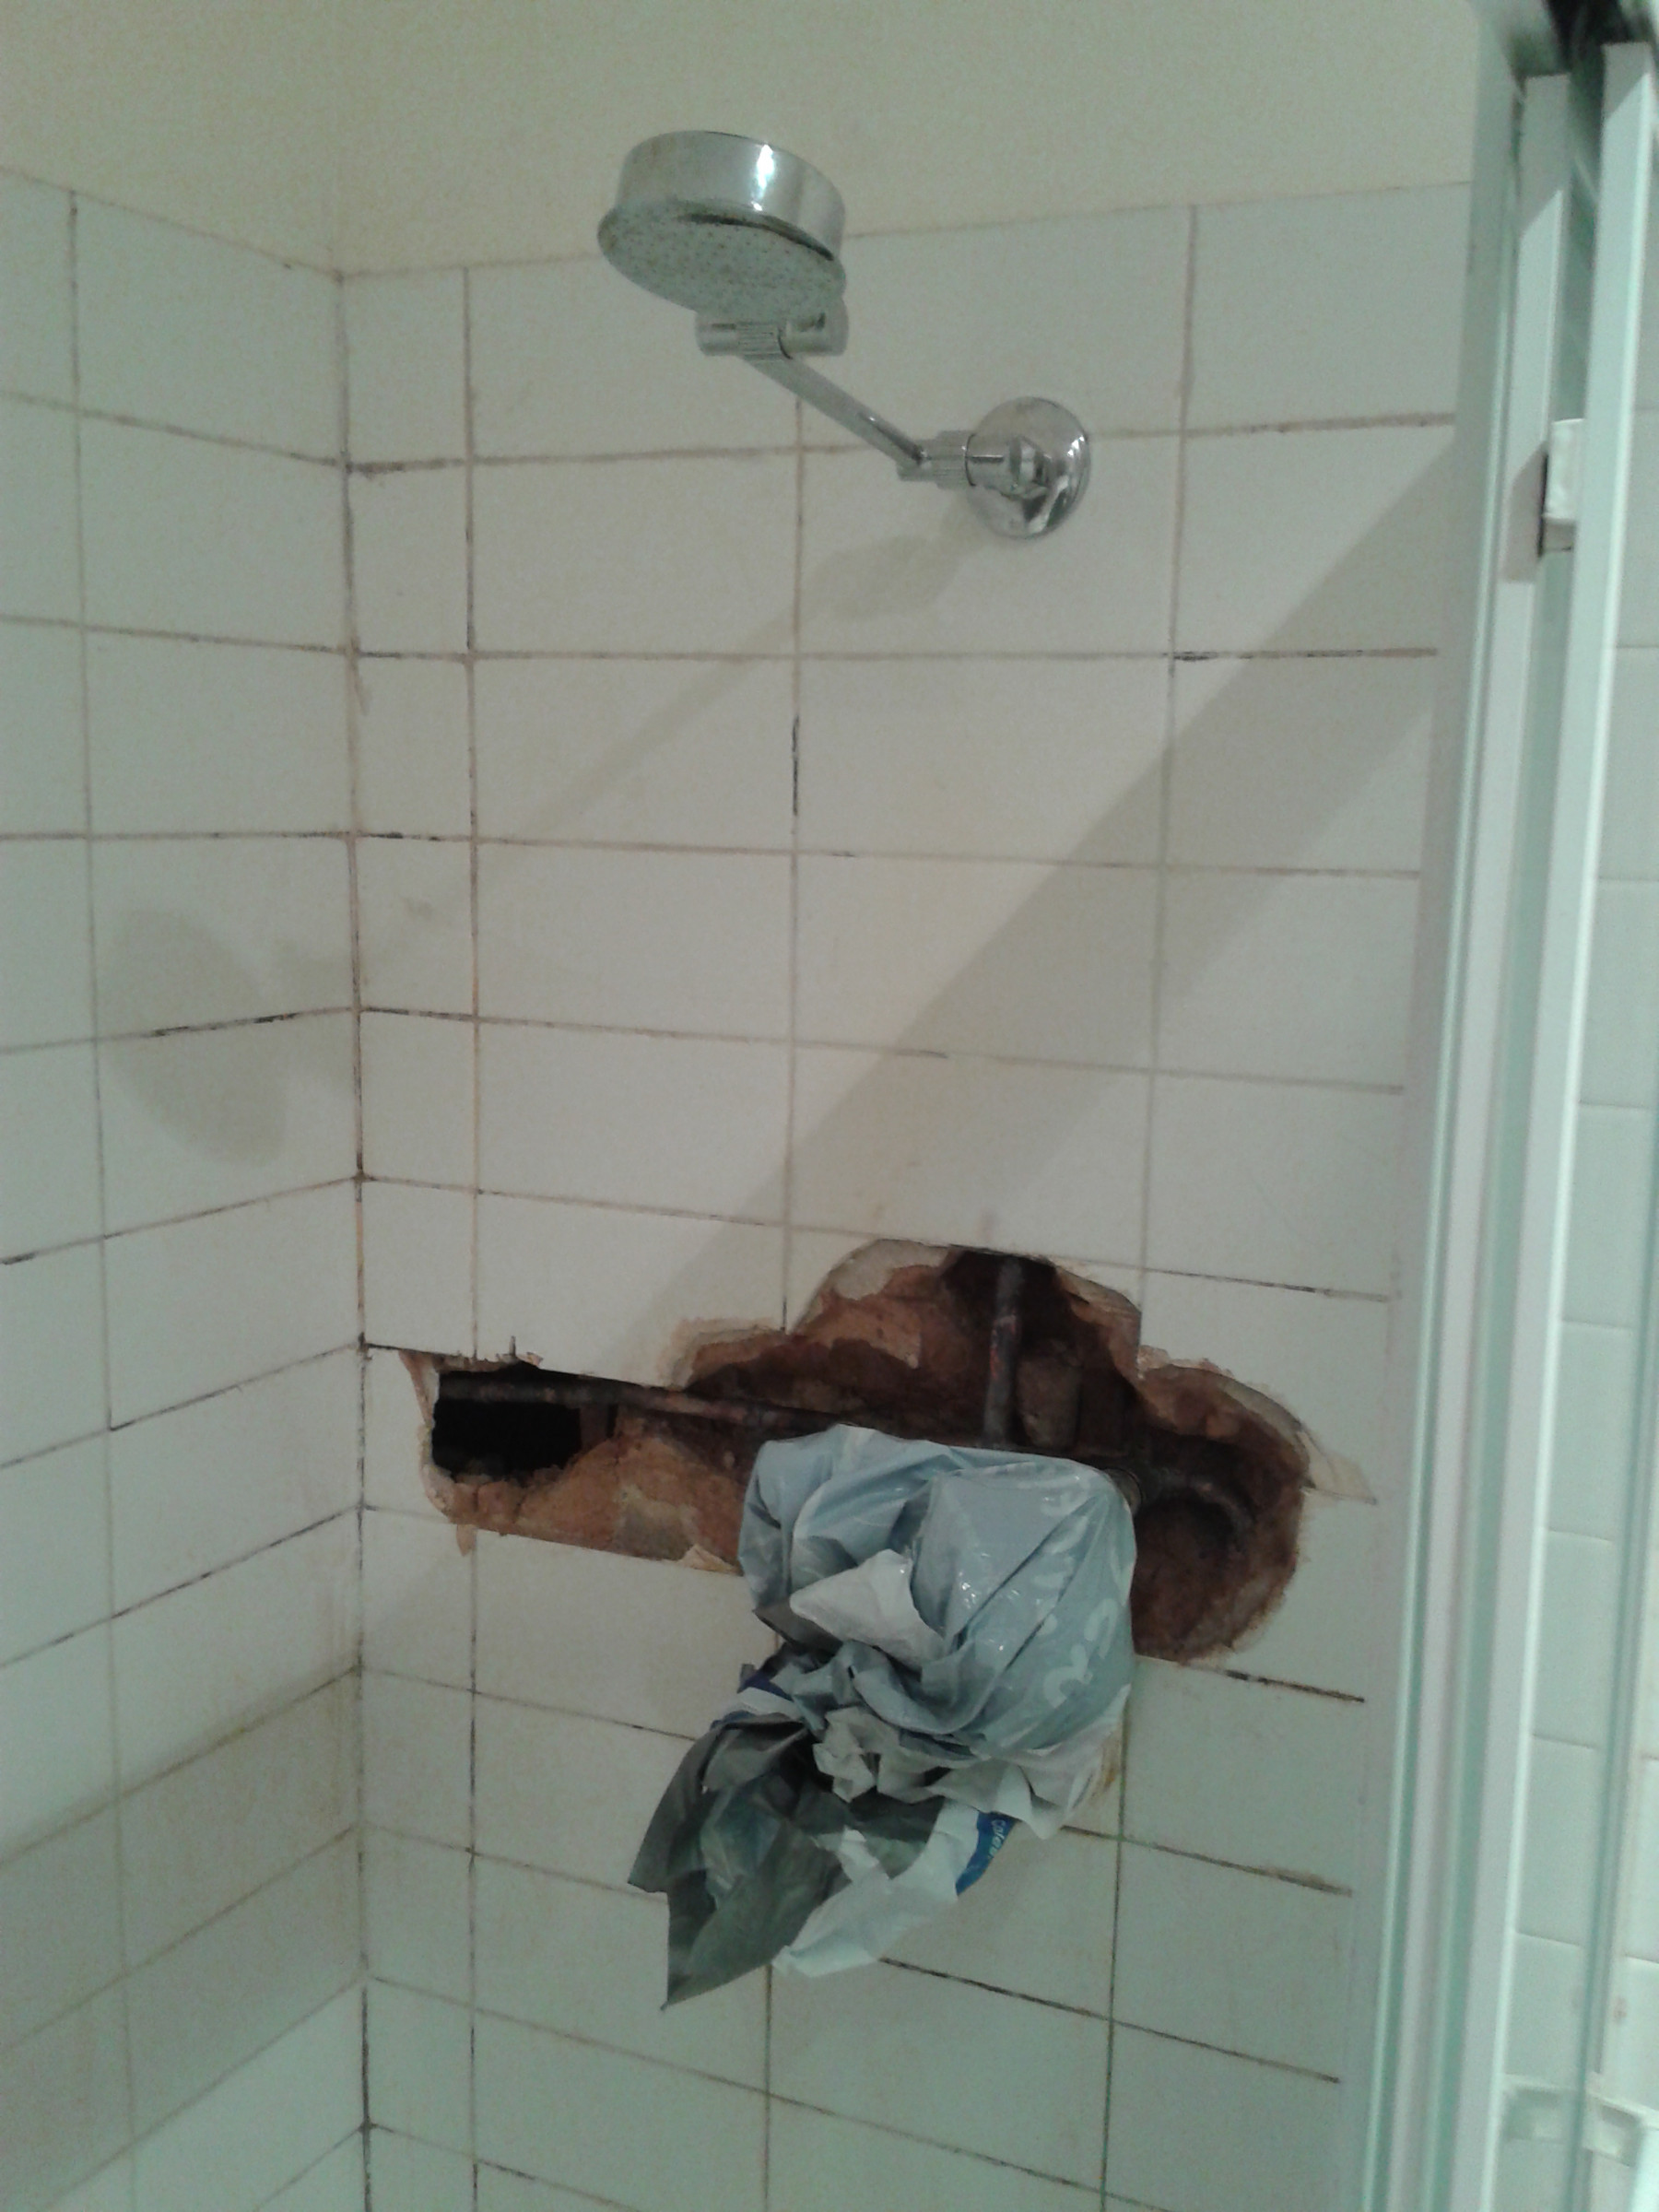 plumbing - Making piping easily accessible inside shower - Home ...